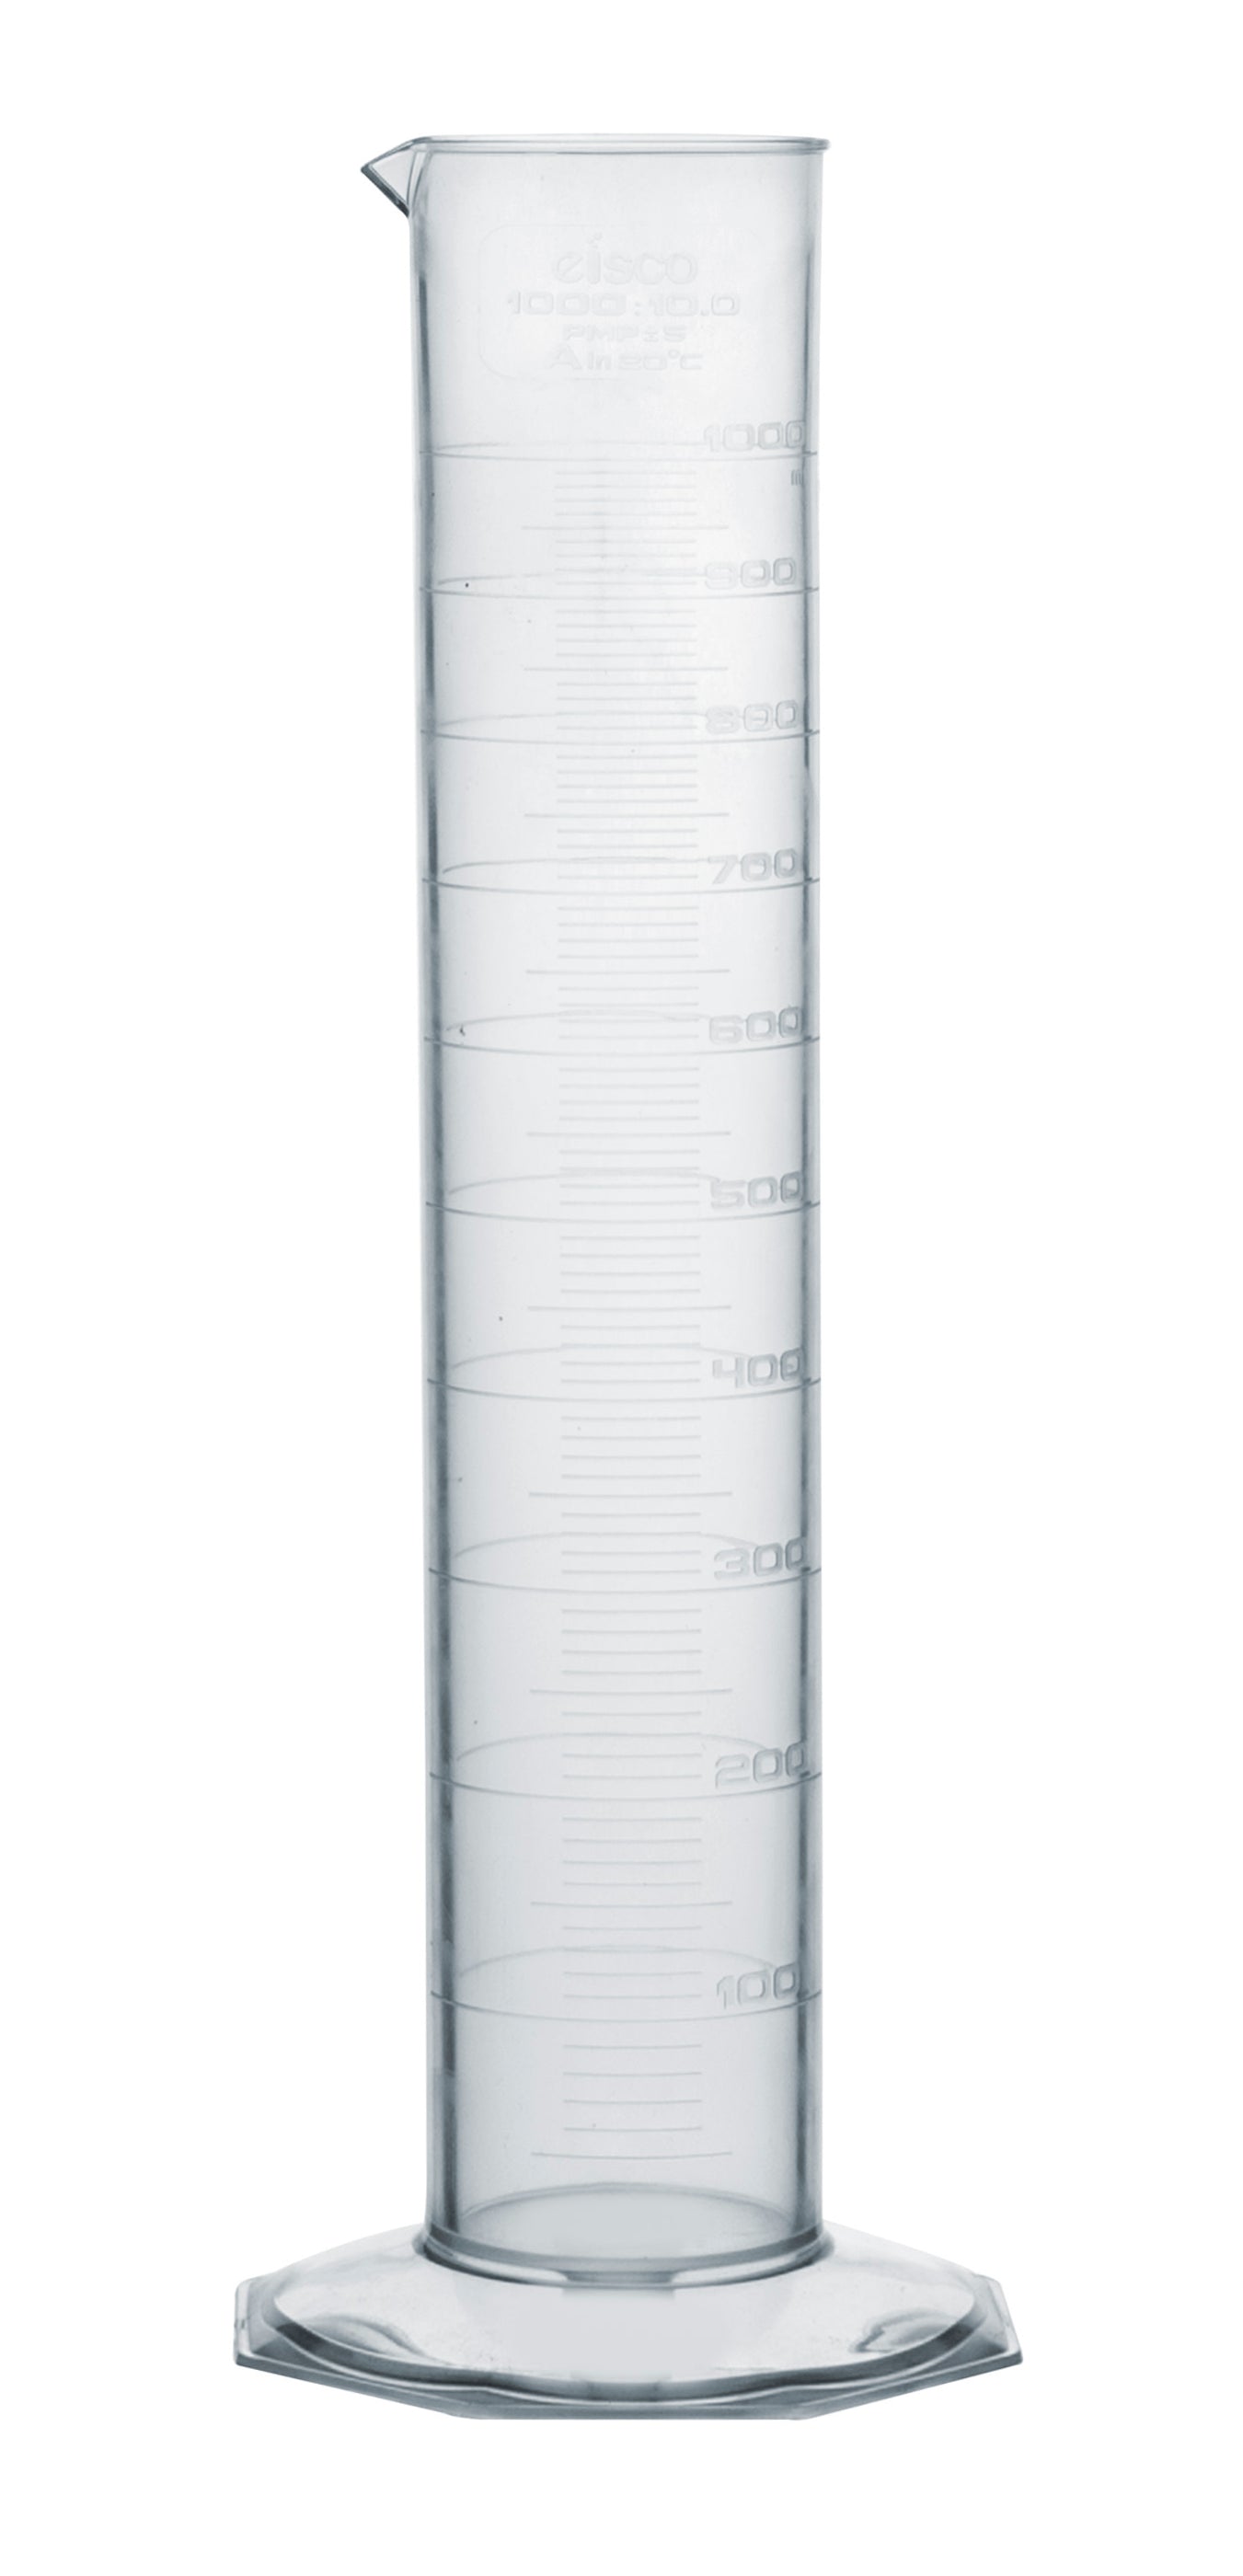 Measuring Cylinder 1000ml Class A Tpx — Eisco Labs 4453